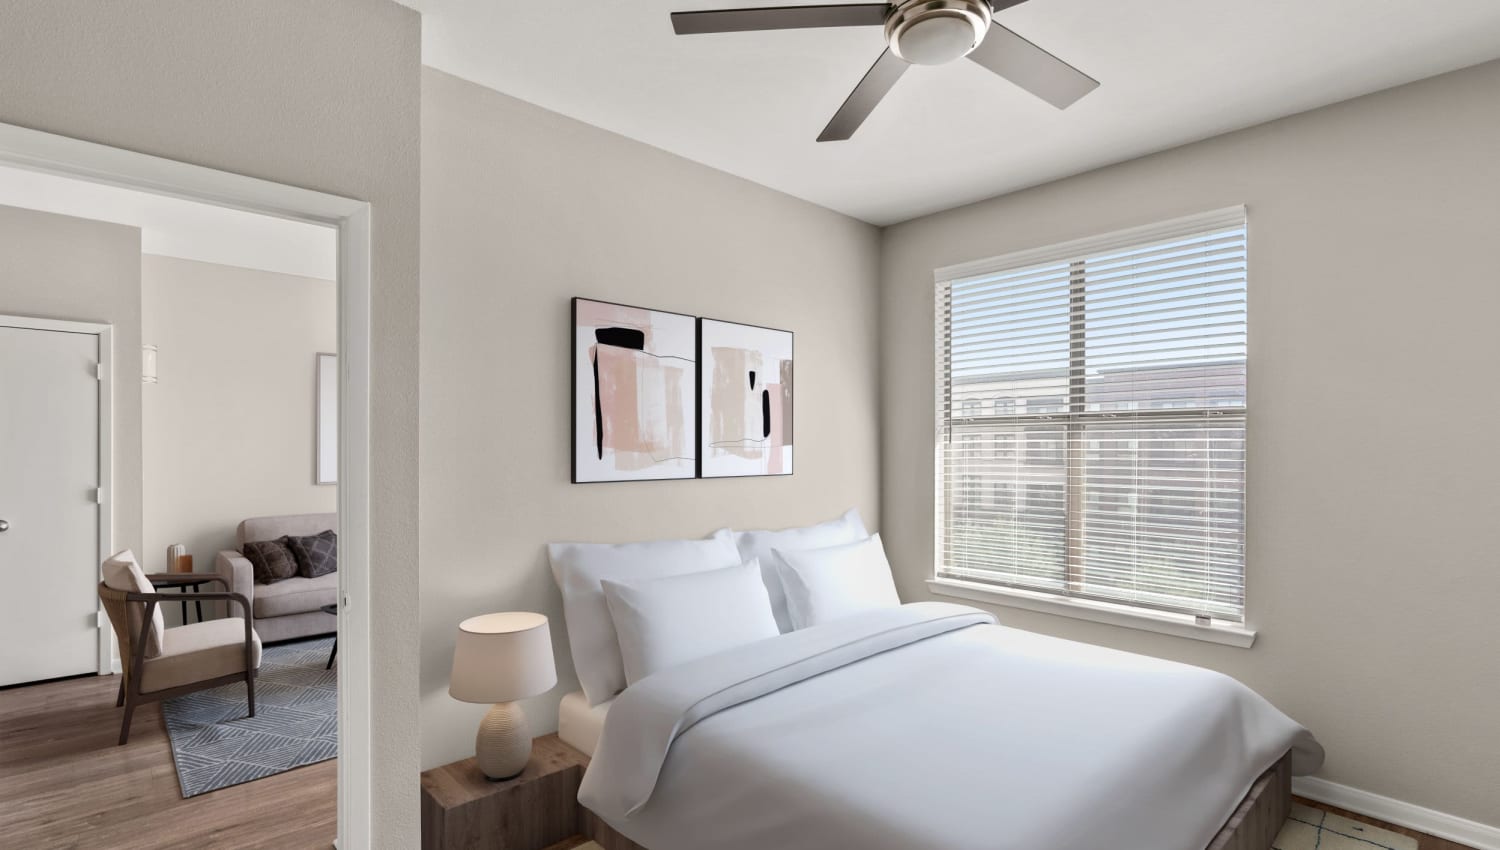 Well decorated and brightly lit model bedroom at Olympus Boulevard in Frisco, Texas